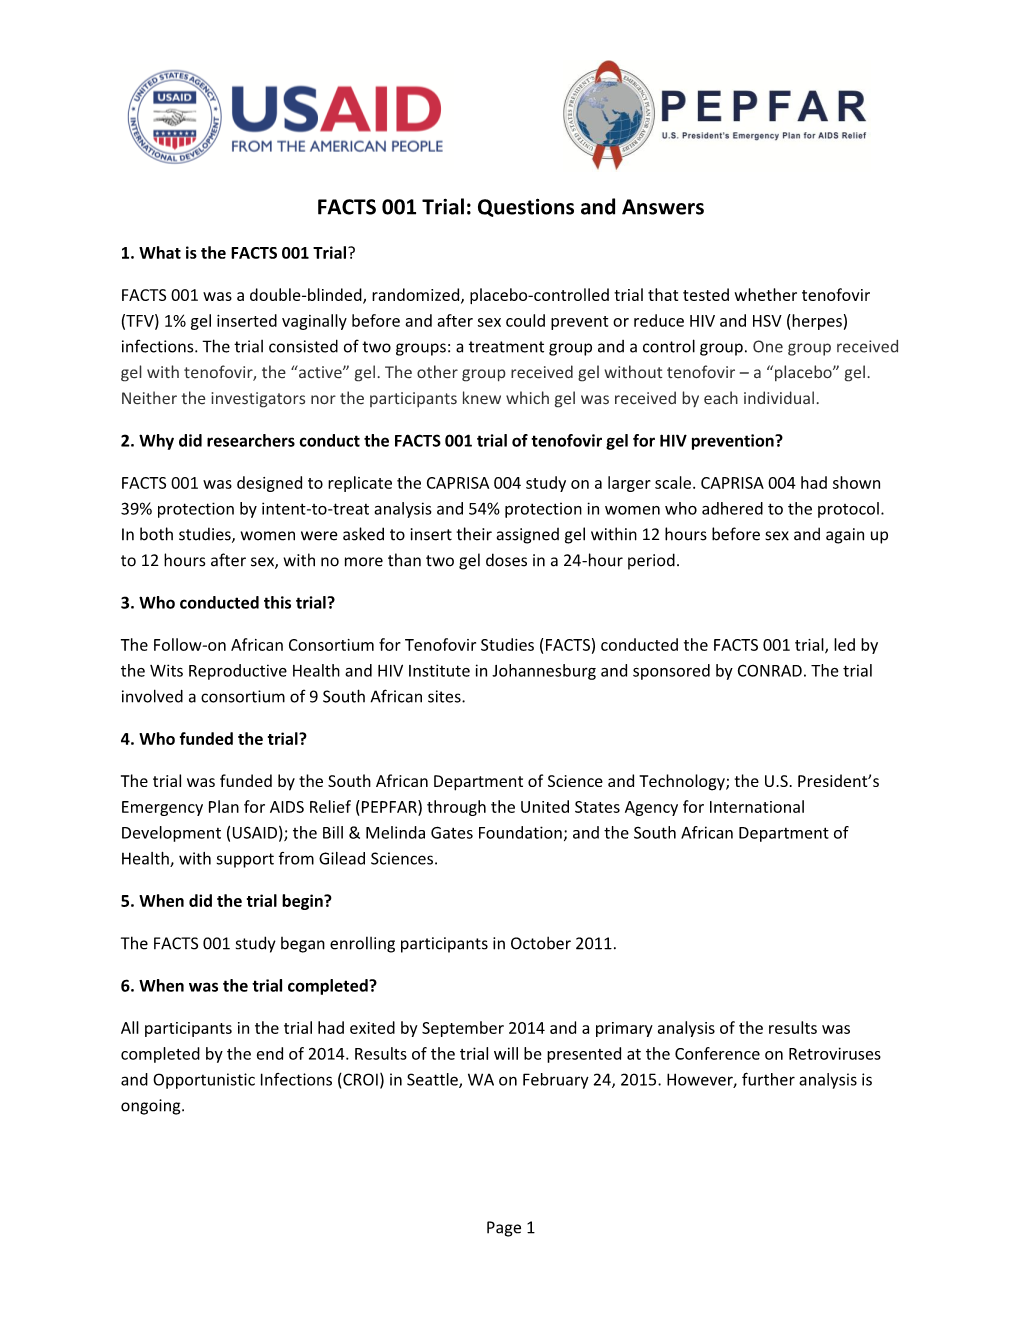 FACTS 001 Trial: Questions and Answers